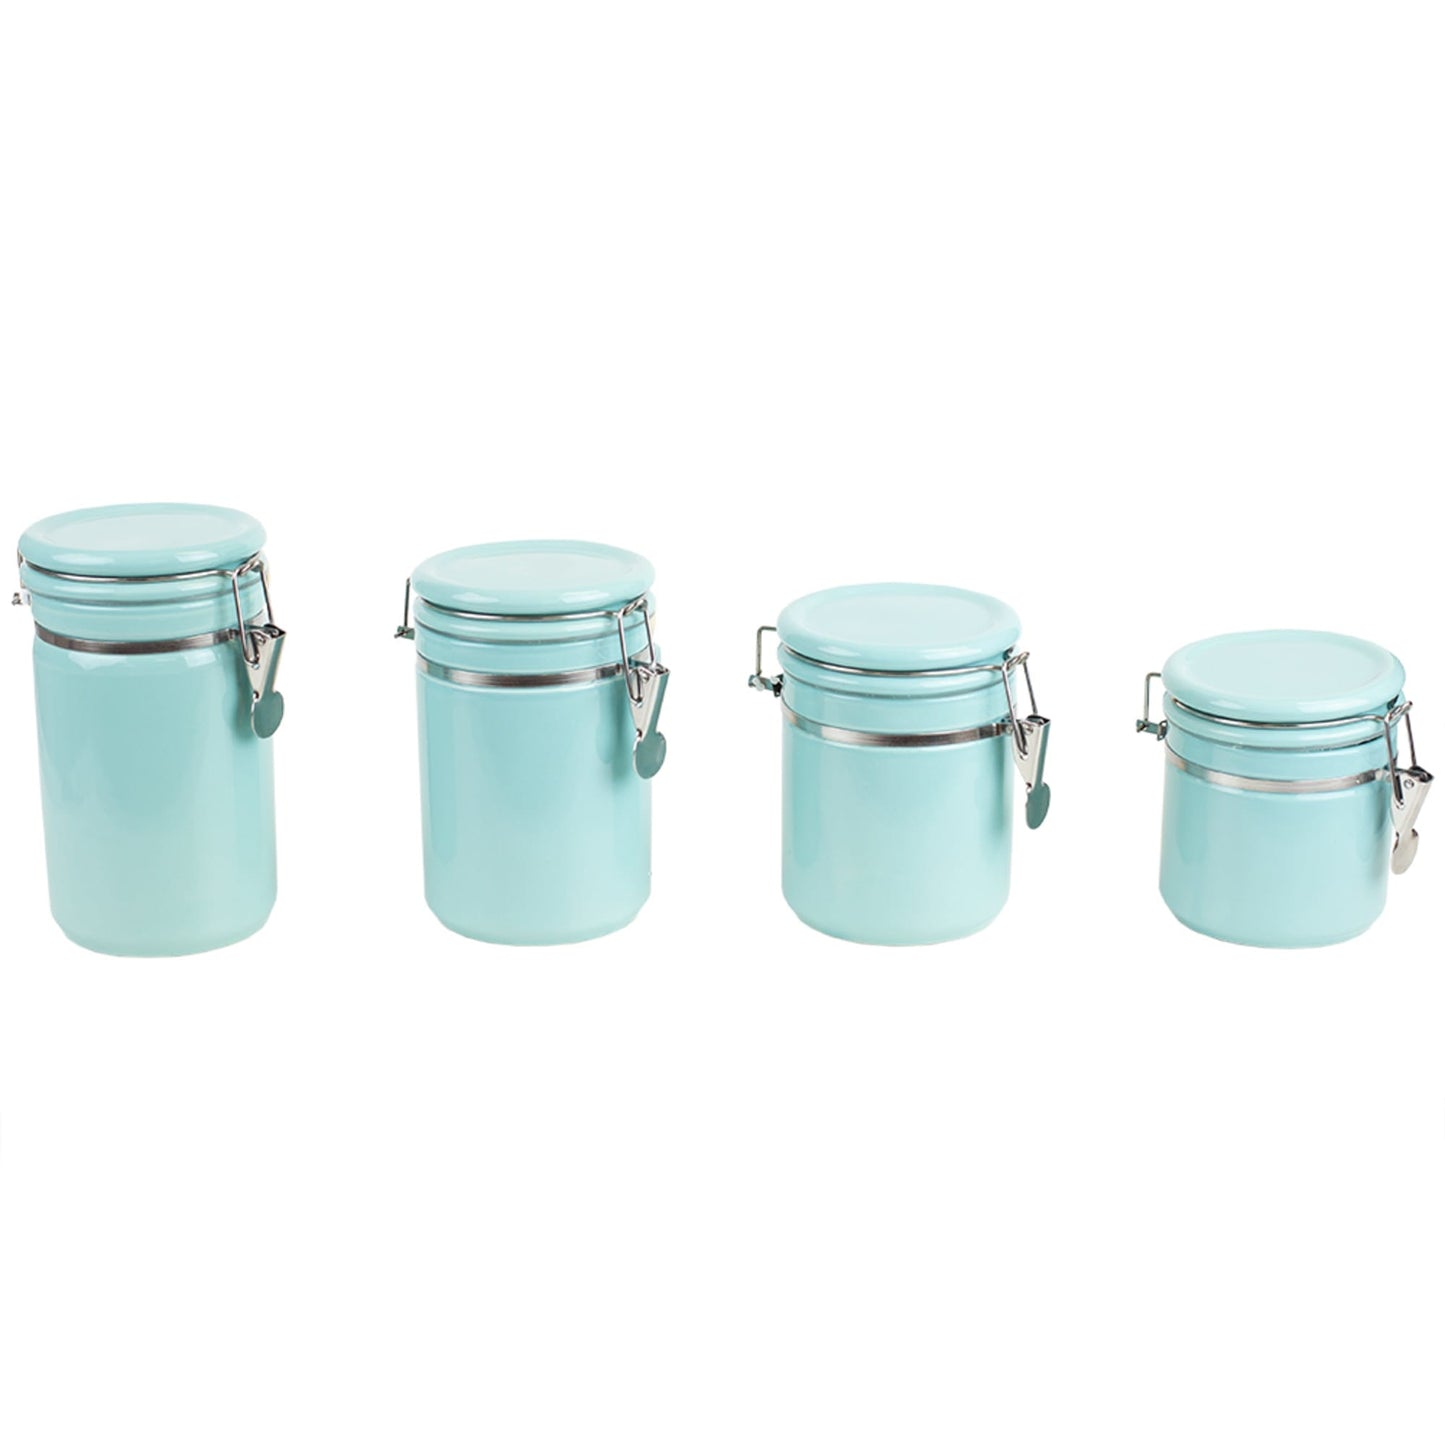 4 Piece Ceramic Canister Set with Wooden Spoons, Turquoise